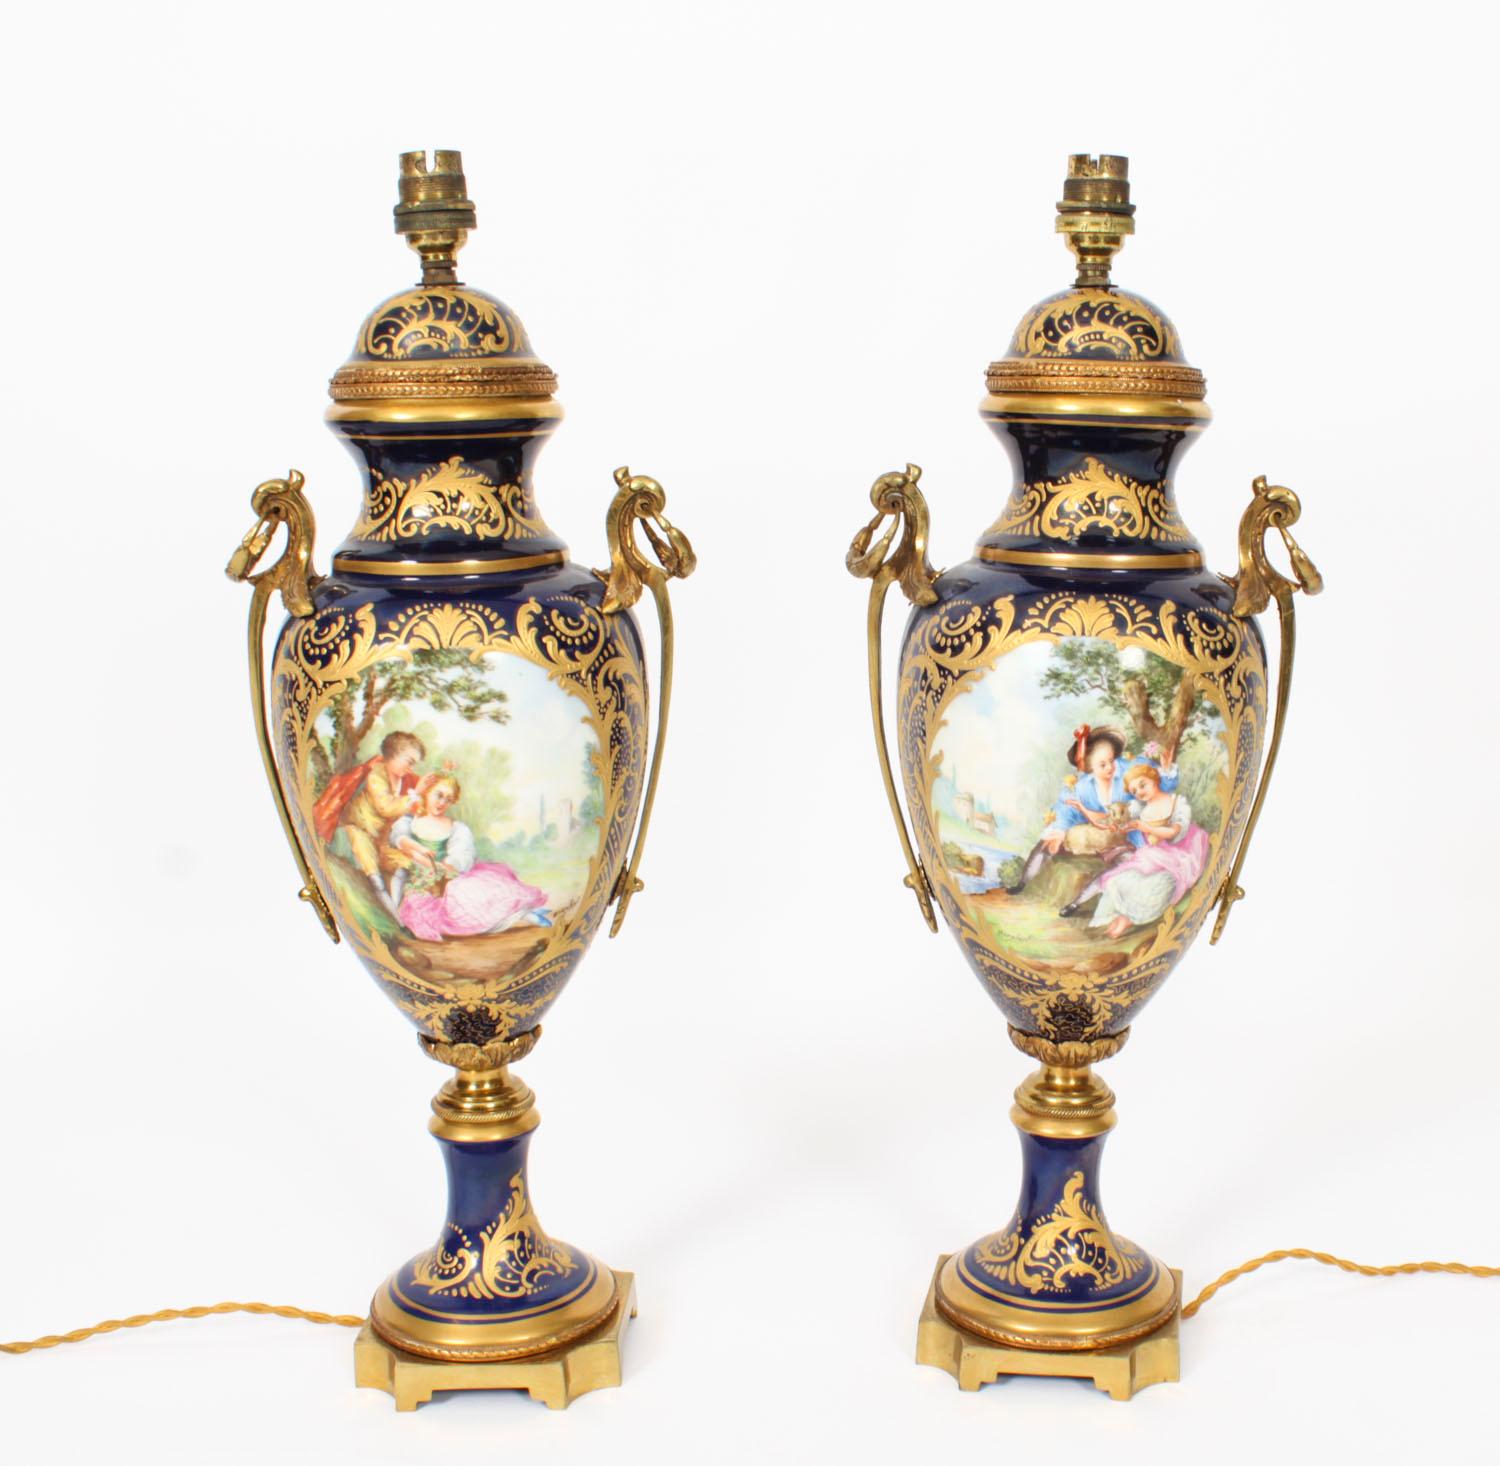 This is an exquisite large pair of French cobalt blue porcelain and ormolu mounted twin handled vases, in the Sevres manner, that have been skillfully converted to electricity, circa 1900 in date. 

The vases are superbly decorated with hand painted